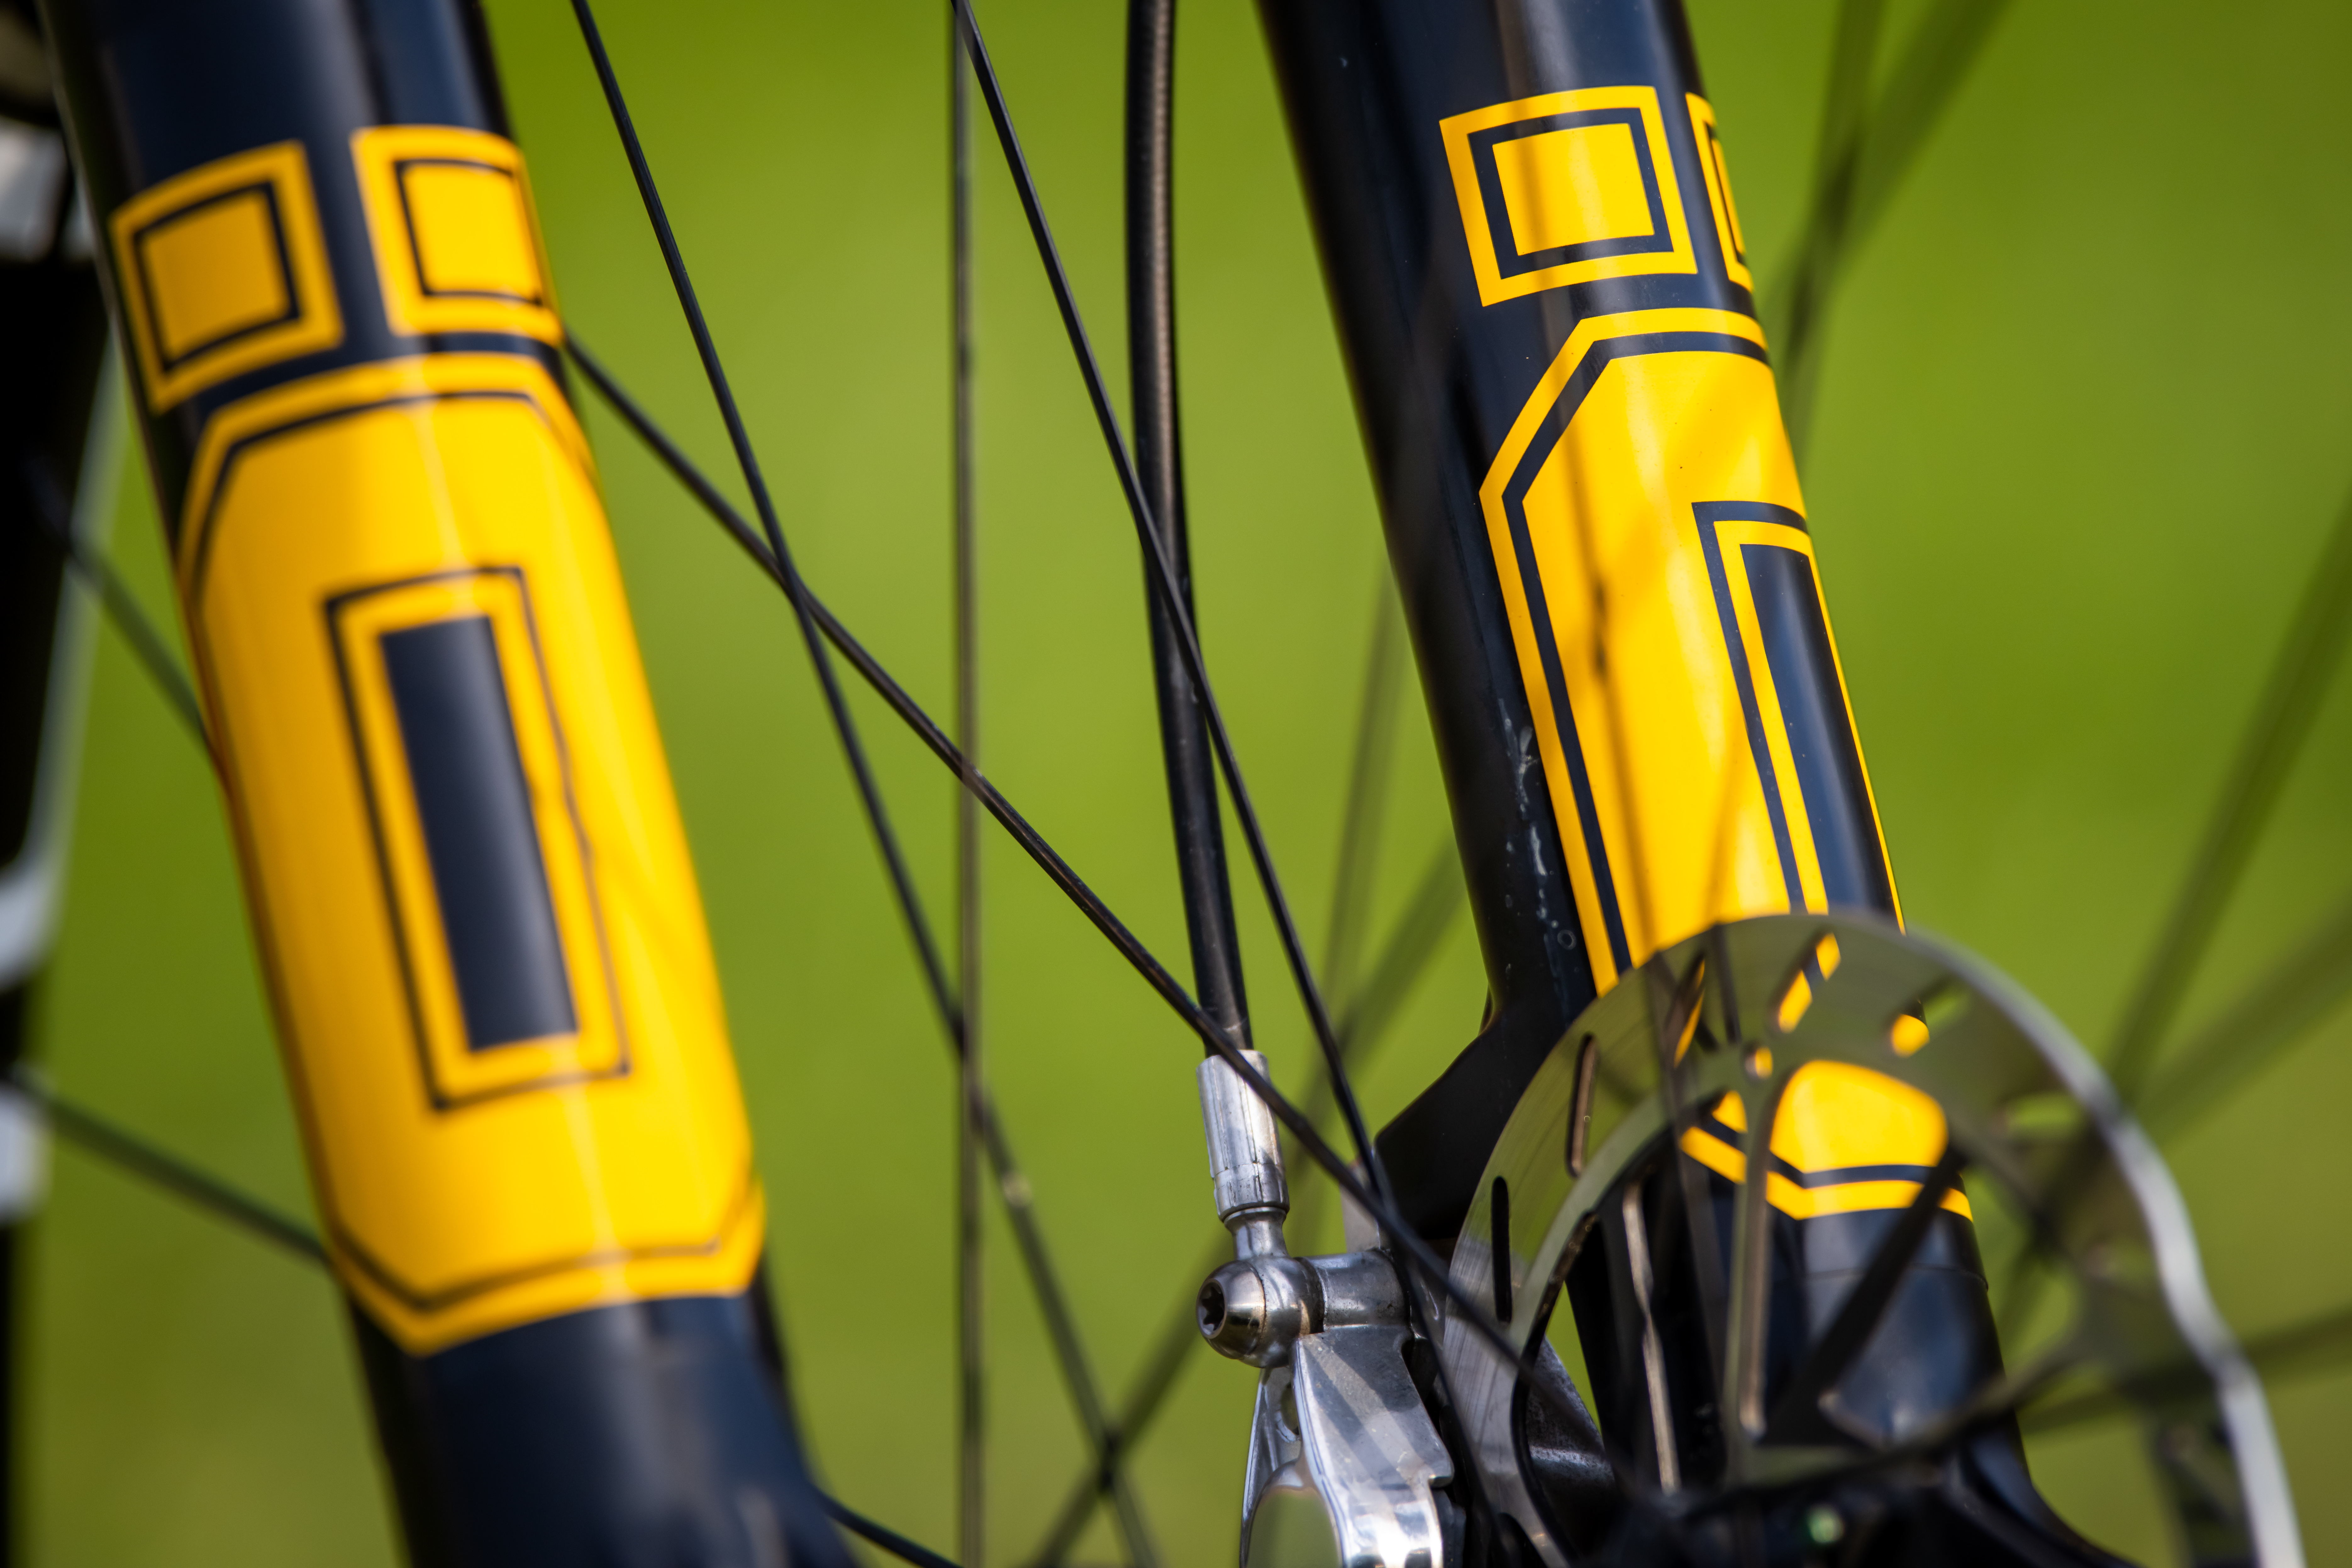 Öhlins is a game changer for Team BMC